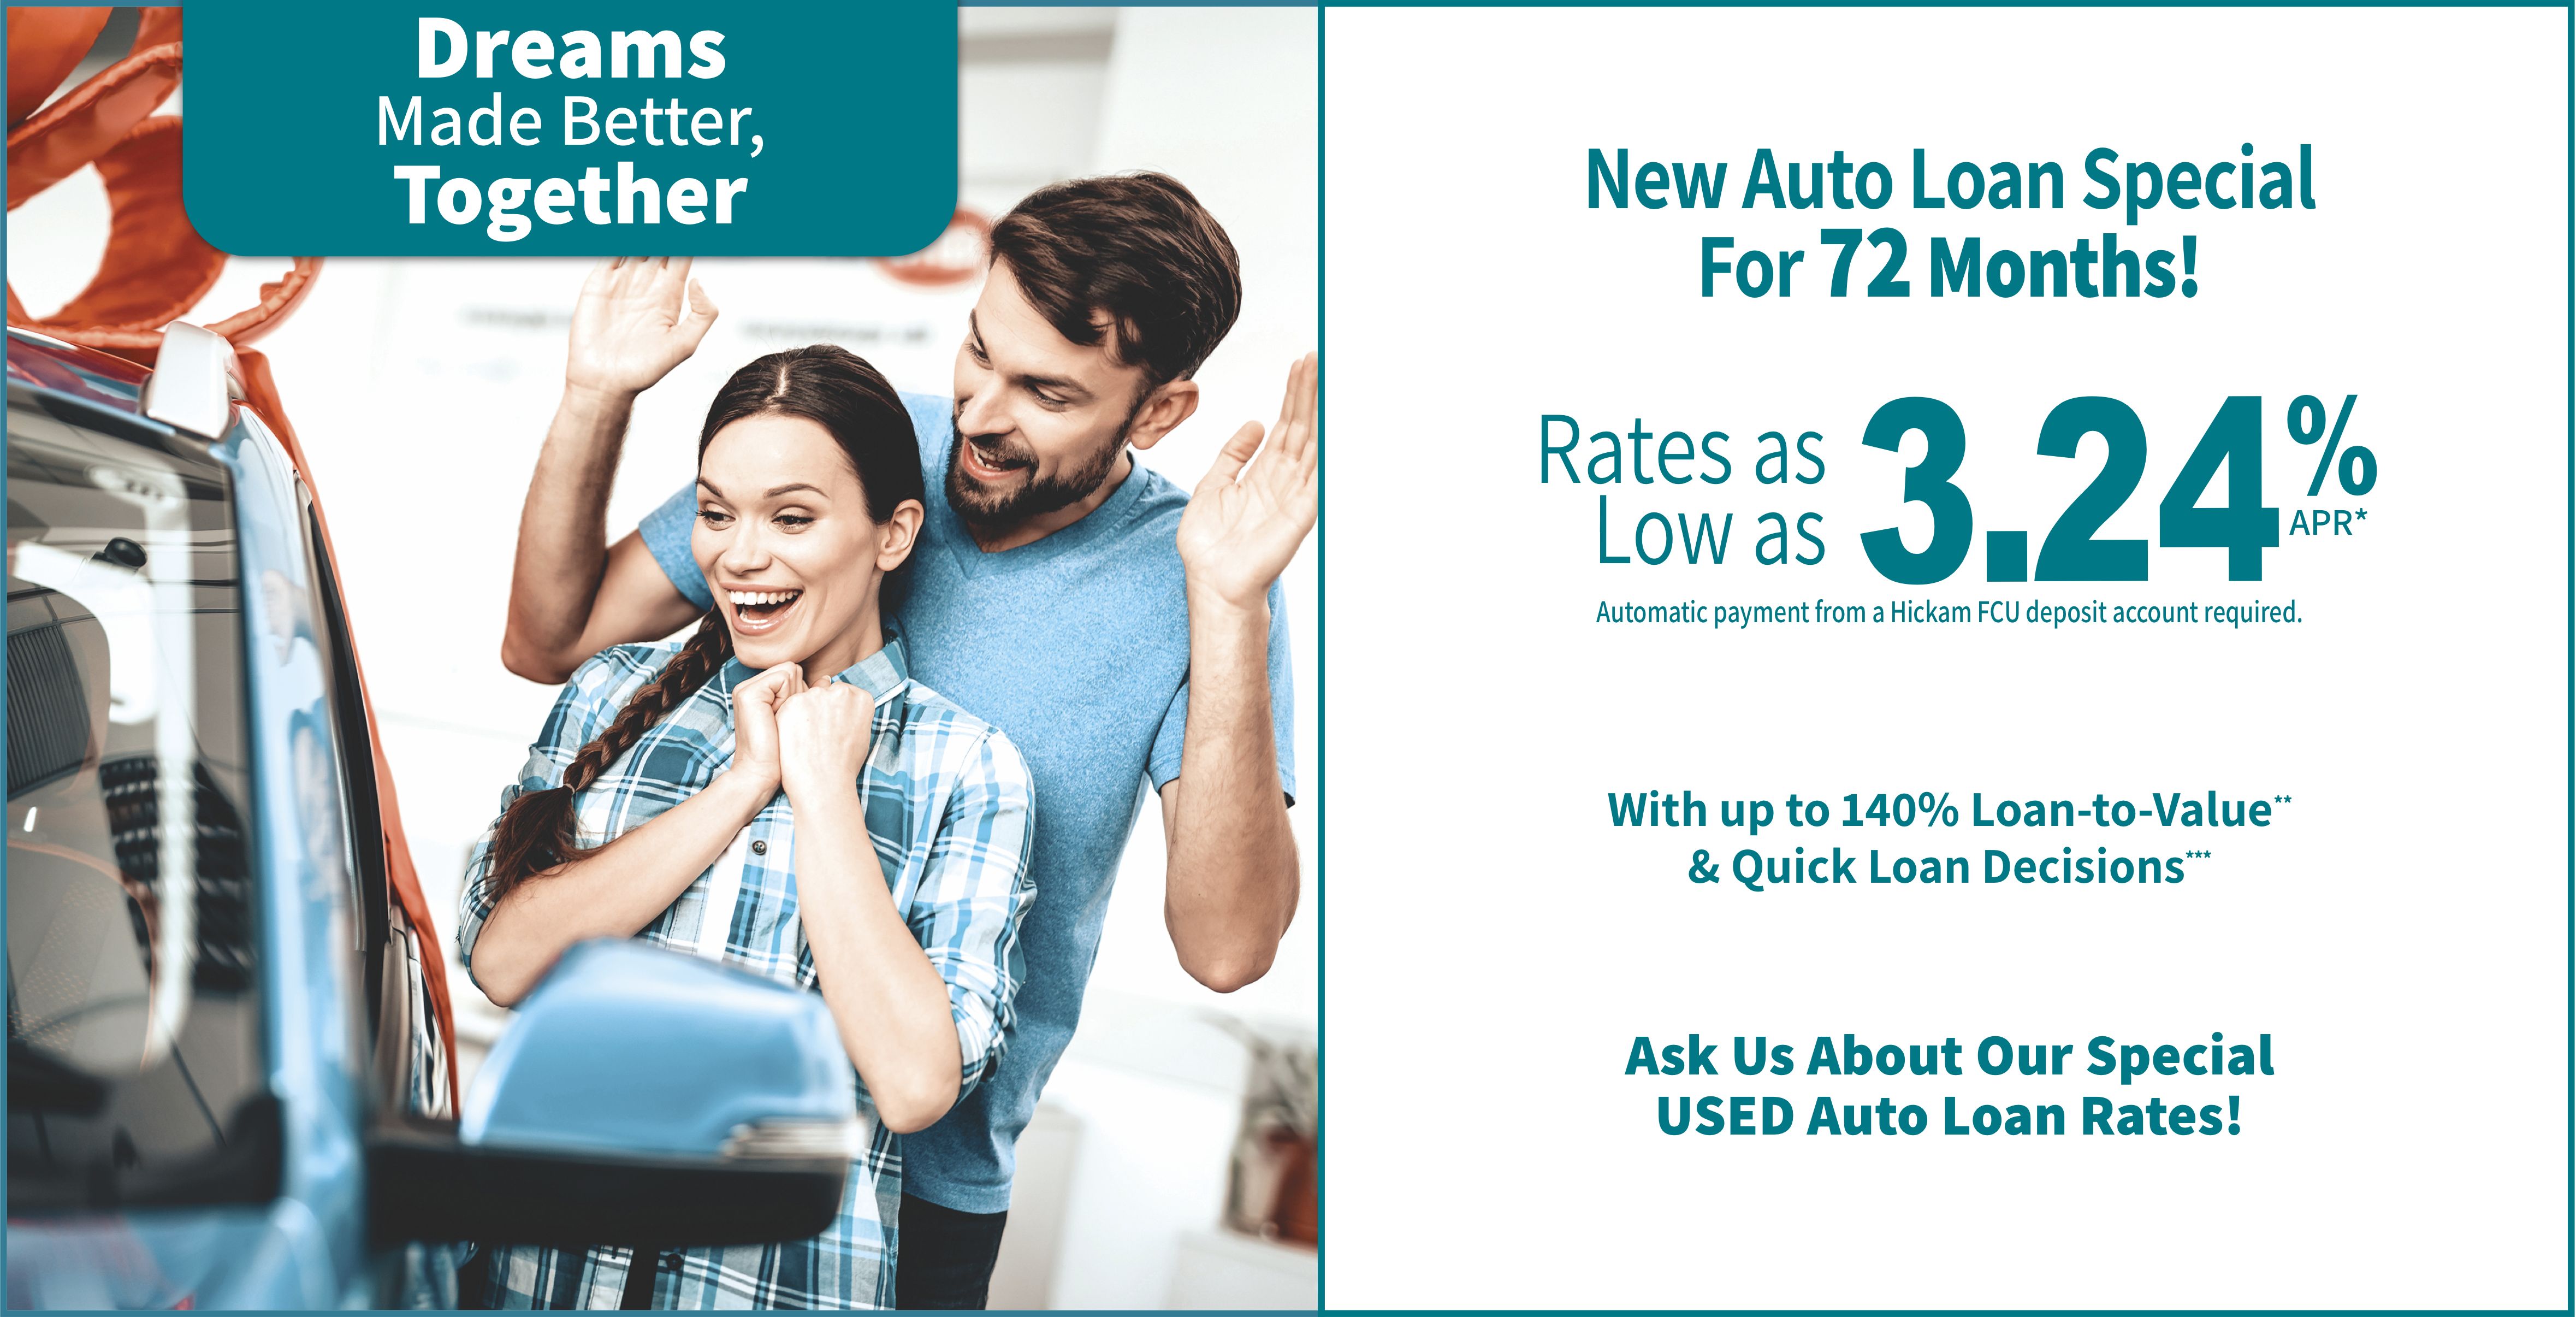 New Auto Loan Special for 72 months!. Rates as low as 3.24% with up to 140% loan-to-value. Ask us about our special new auto loan rates! great low rates quick loan decisions. Easy online applications